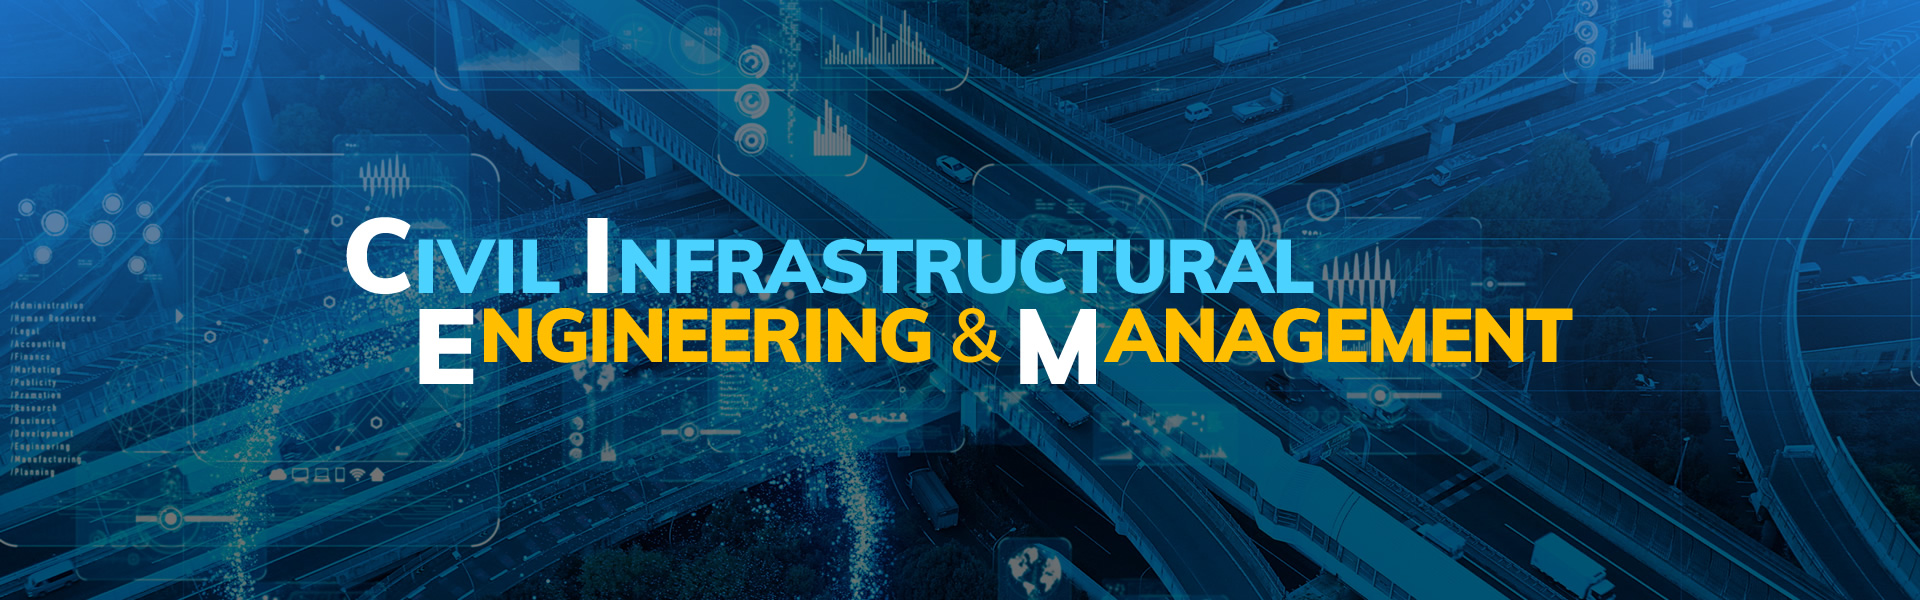 MSc in Civil Infrastructural Engineering and Management